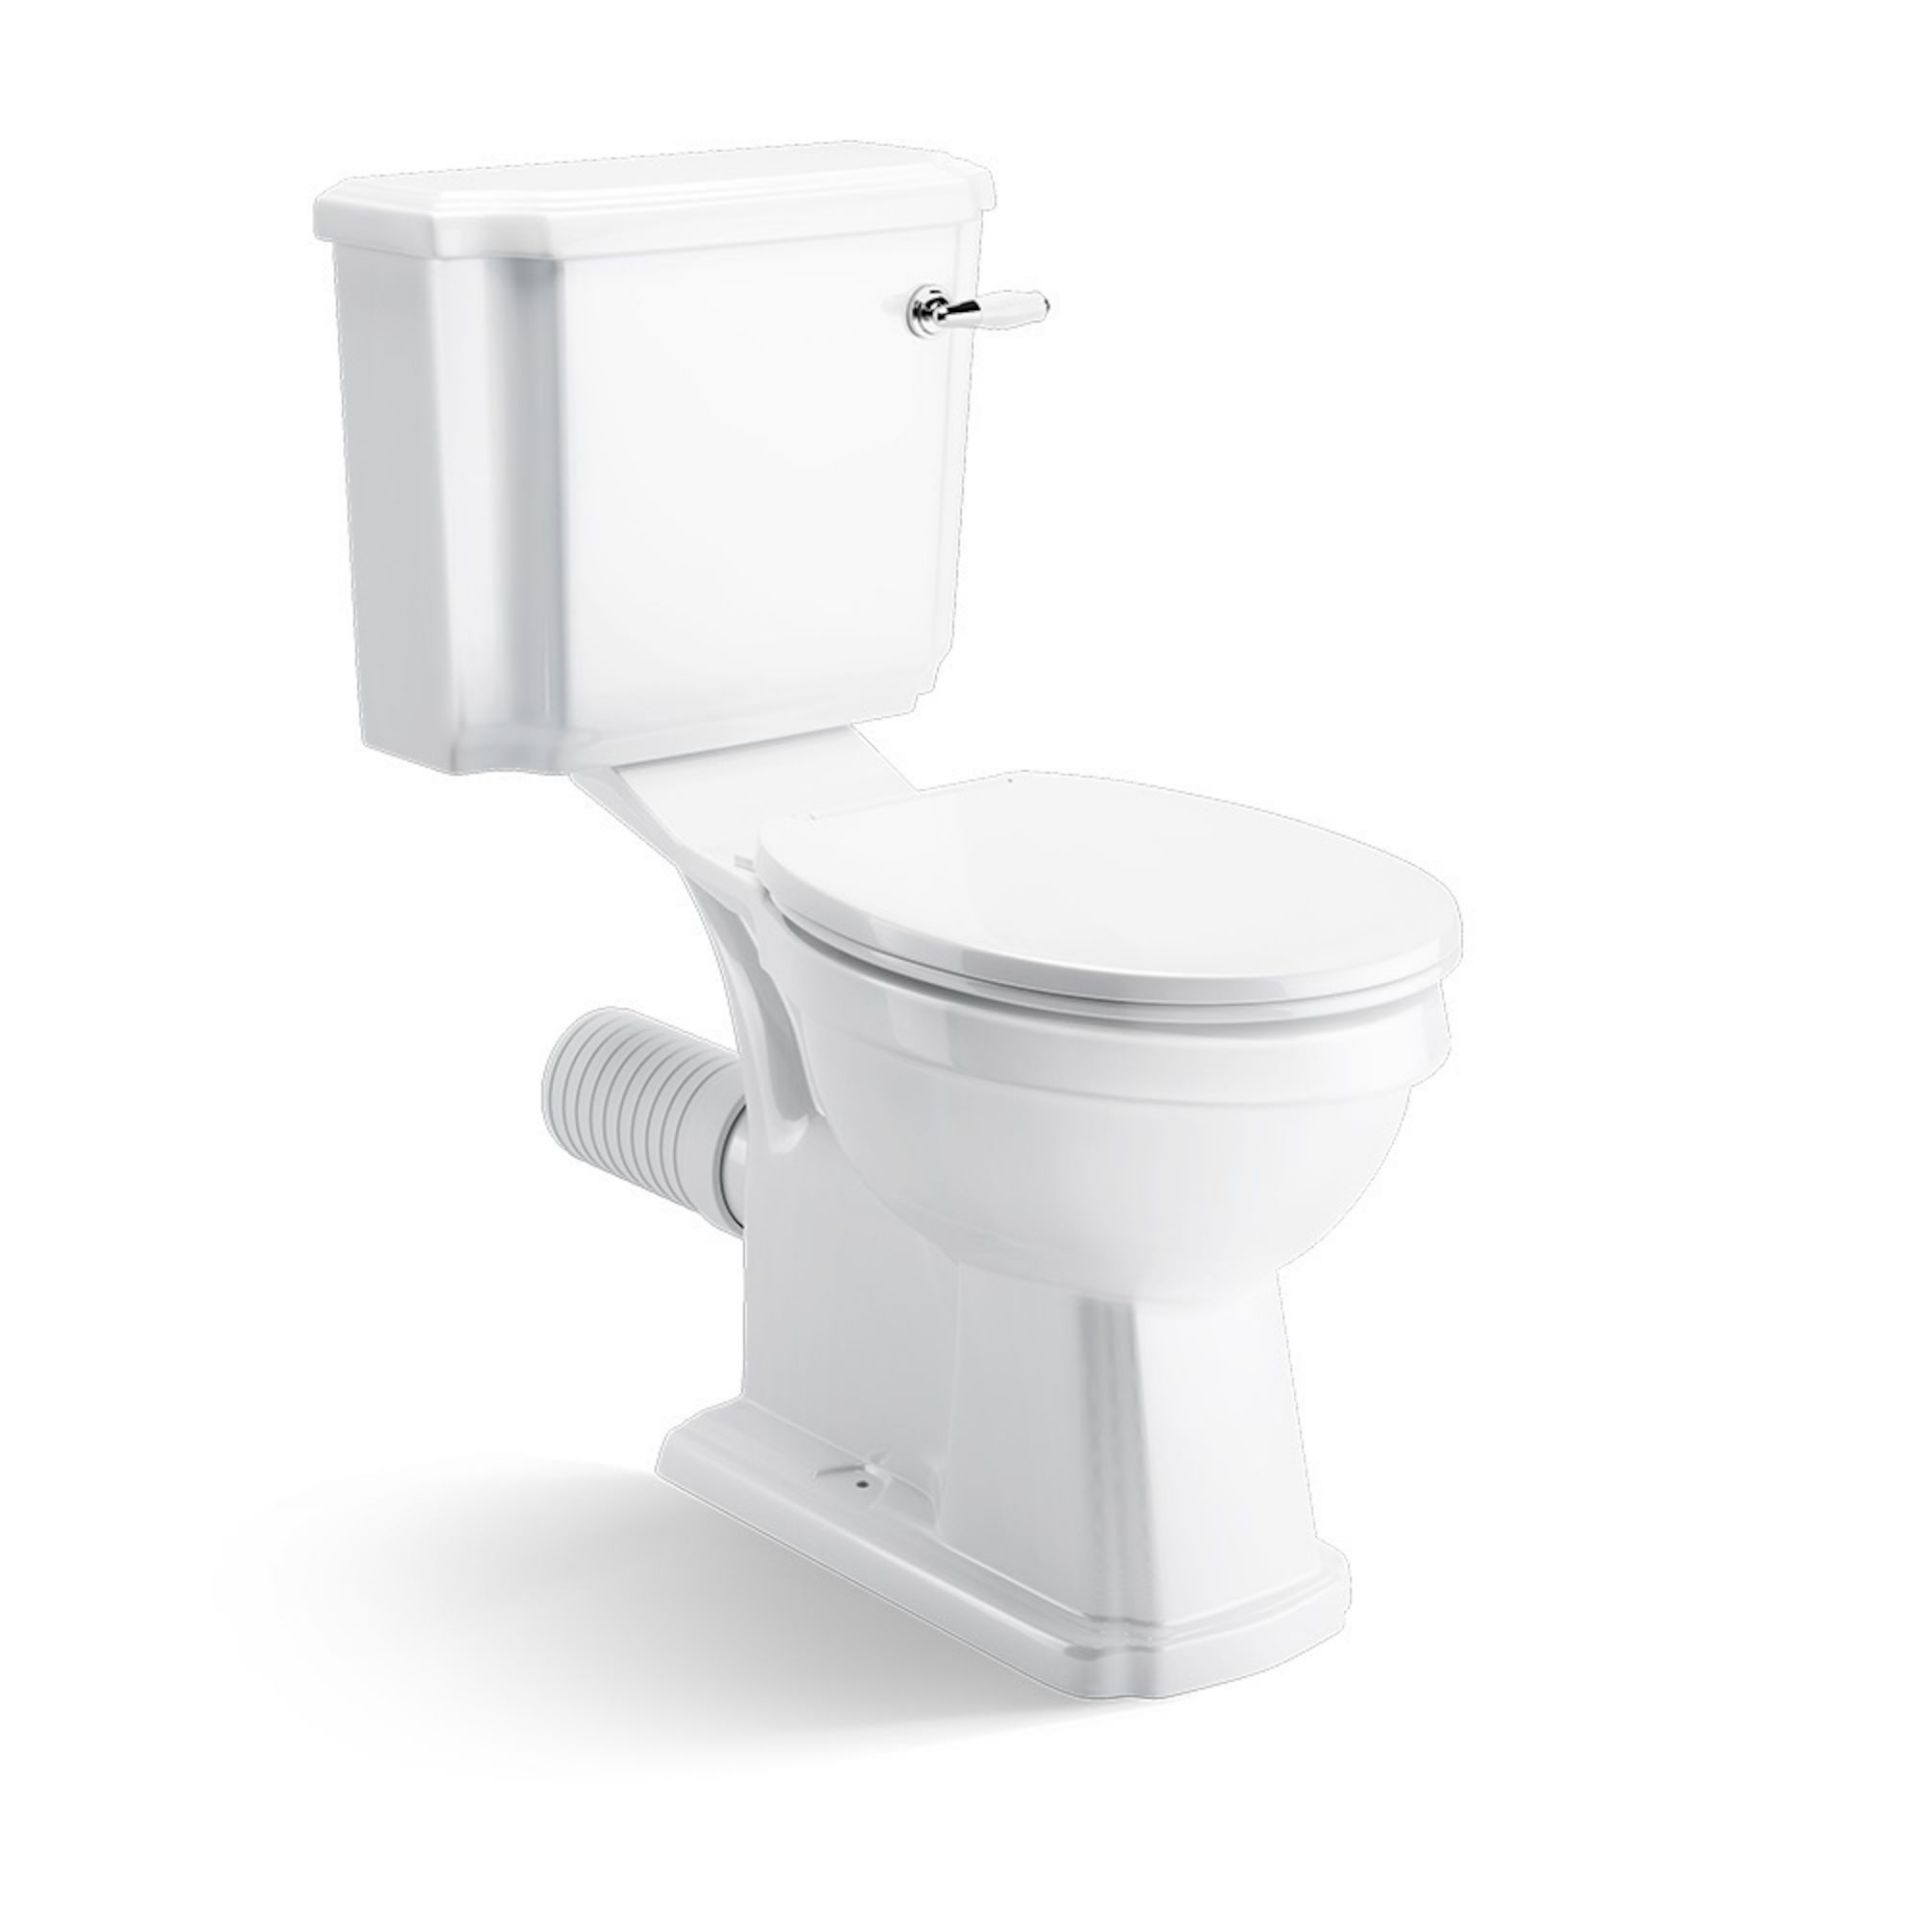 (OS242) Cambridge Traditional Close Coupled Toilet & Cistern - White Seat Traditional features add - Image 2 of 4